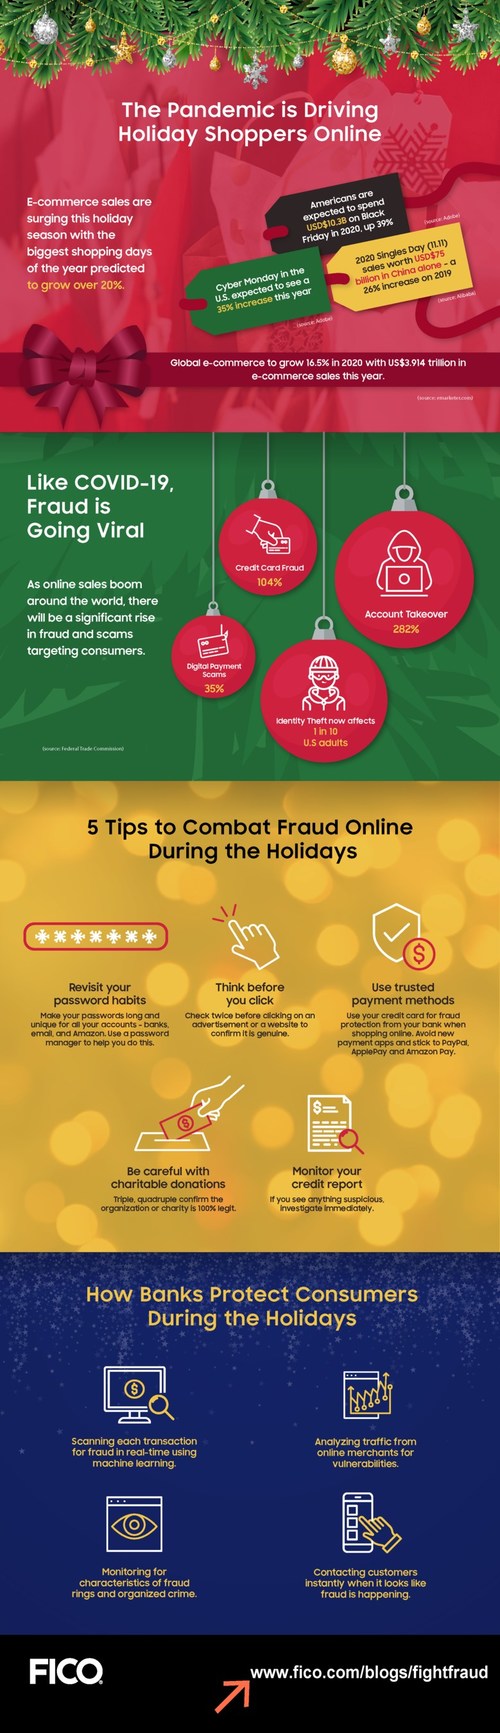 5 Tips to Combat Fraud Online During the Holidays